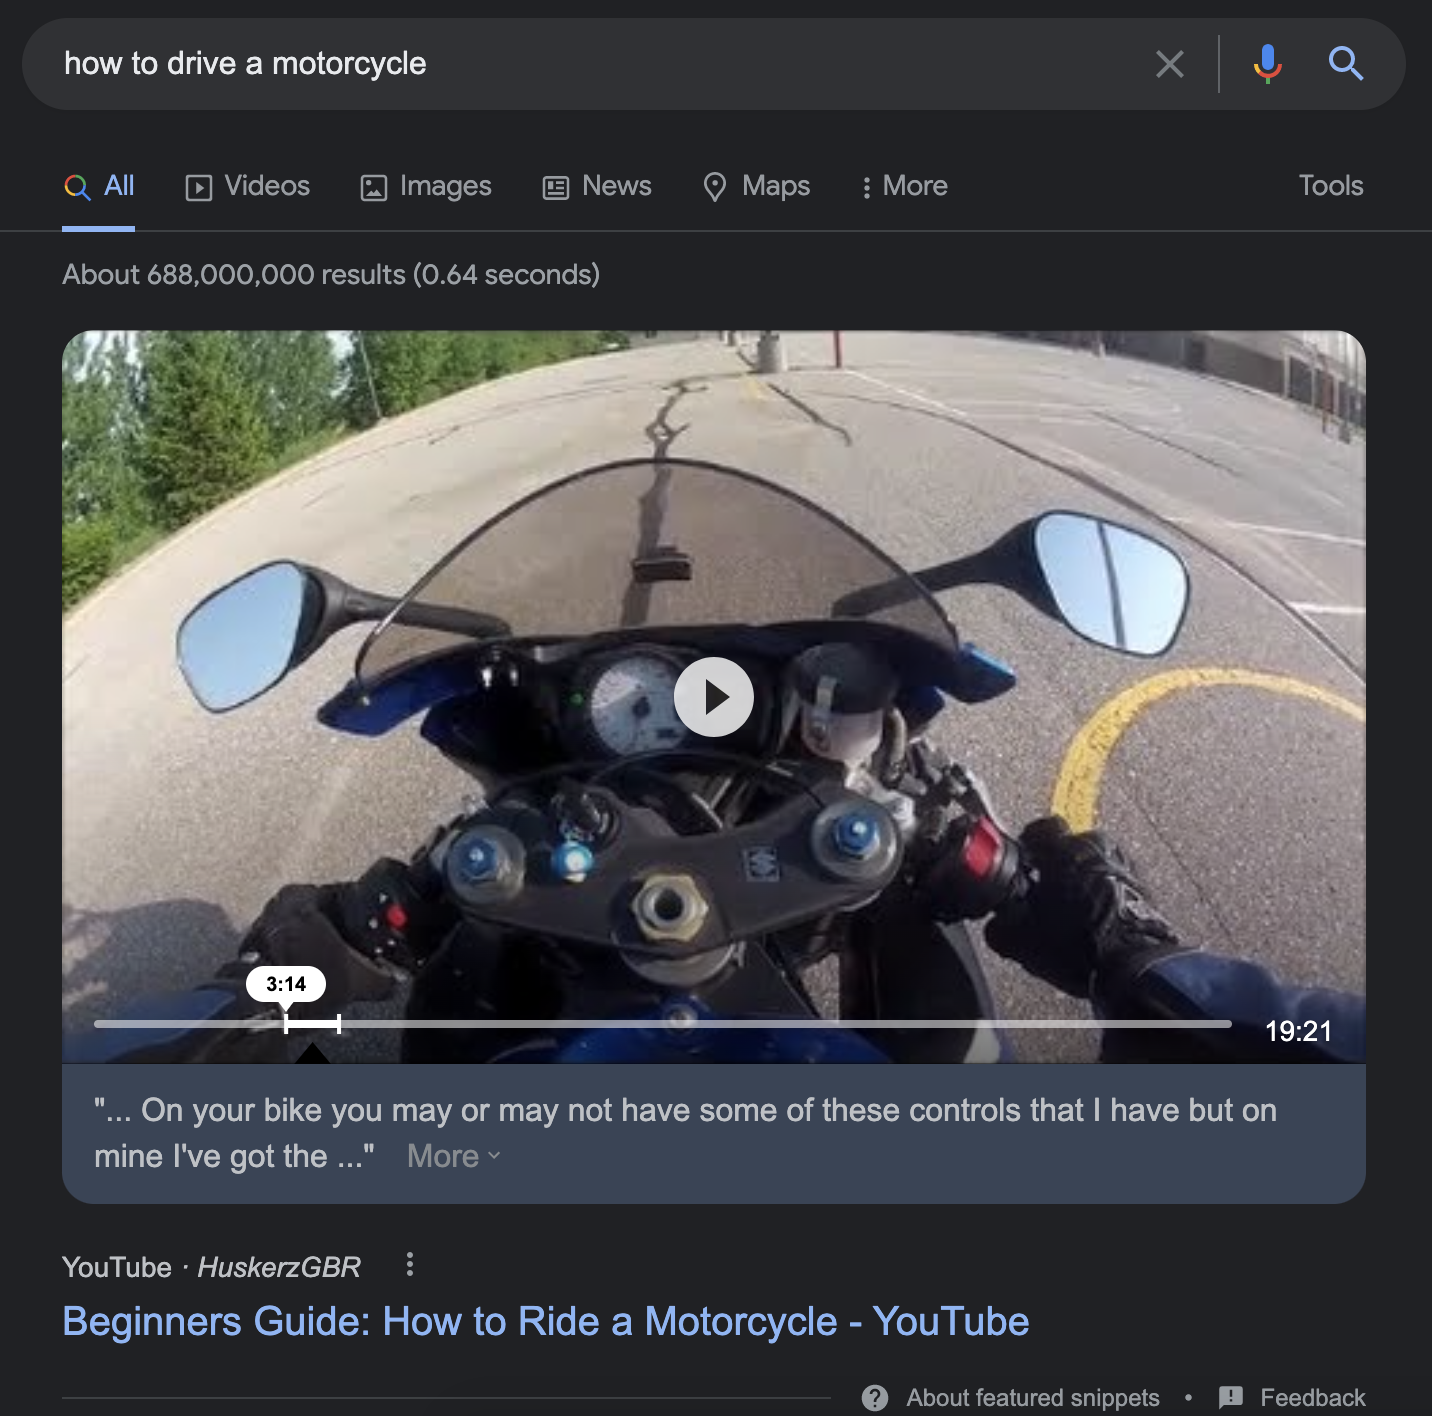 Video snippet of a motorcycle showing how keyword research for SEO can help promote snippets